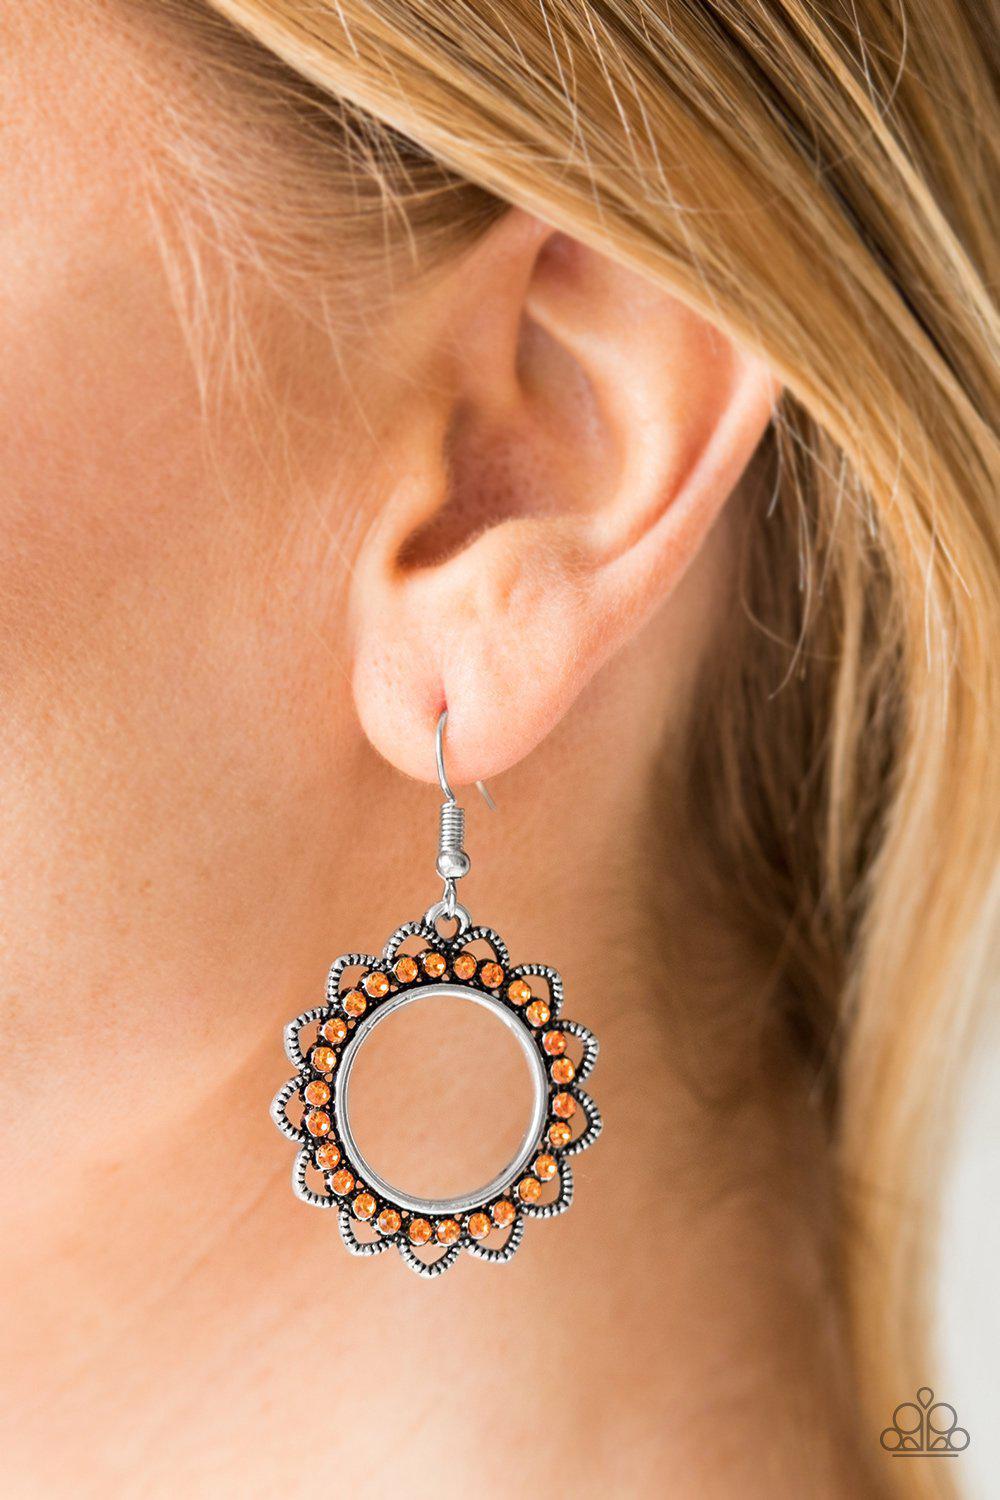 Bring Your Tambourine Orange Earrings - Paparazzi Accessories-CarasShop.com - $5 Jewelry by Cara Jewels